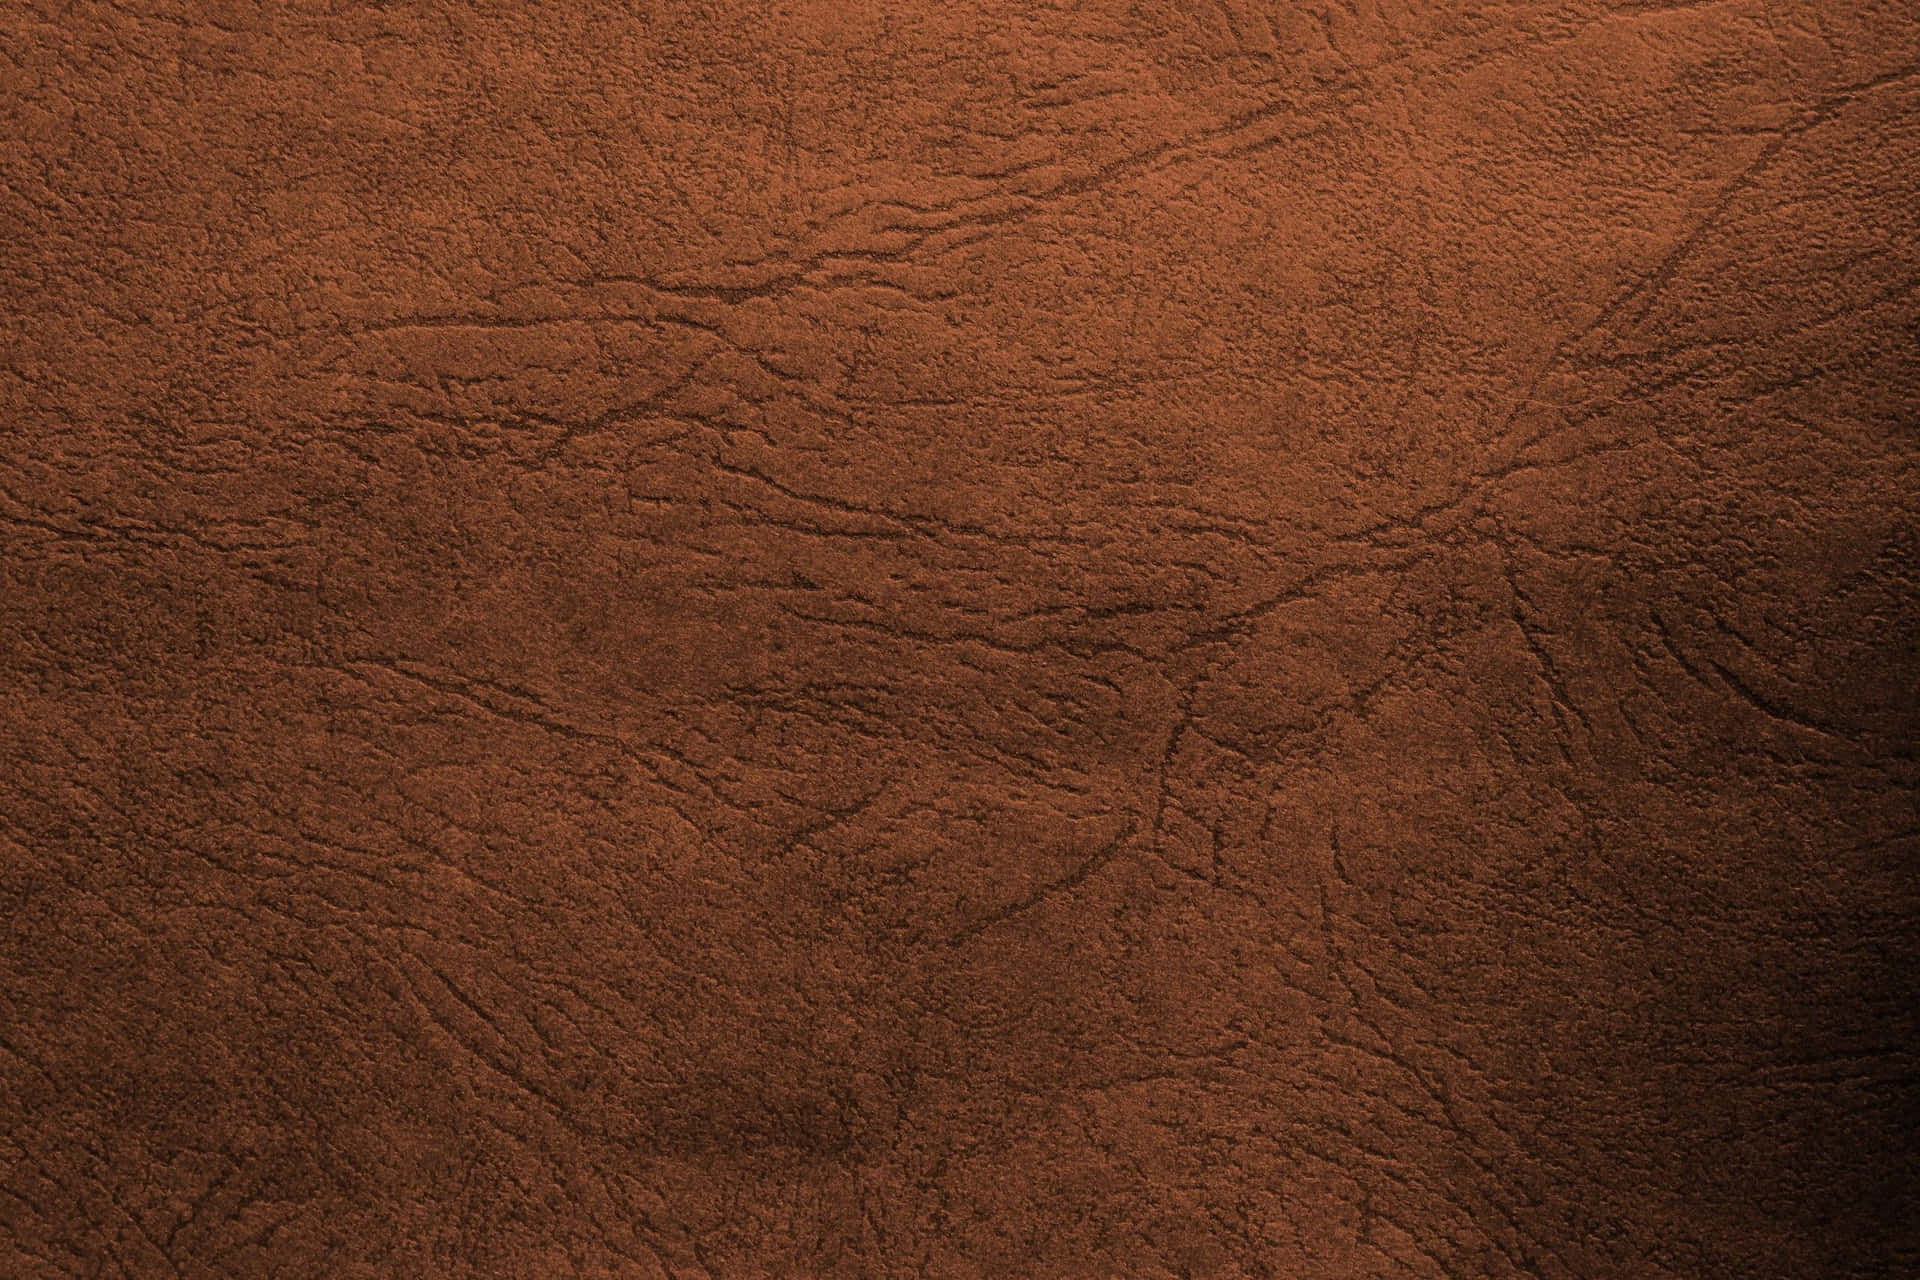 A Close Up Of A Brown Leather Texture